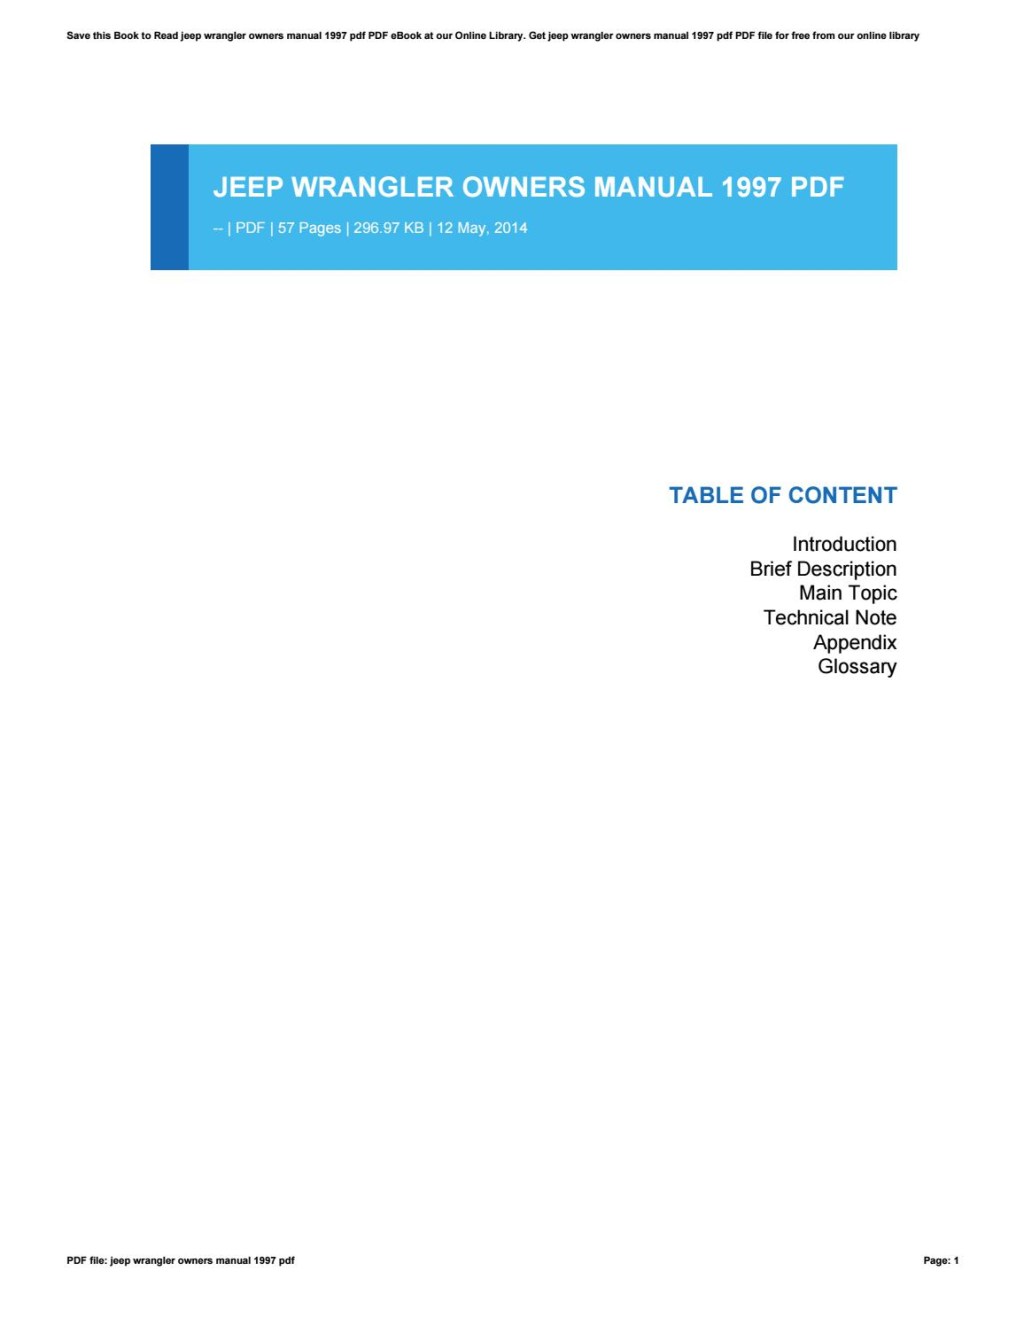 Picture of: Introducir + imagen  jeep wrangler owners manual pdf